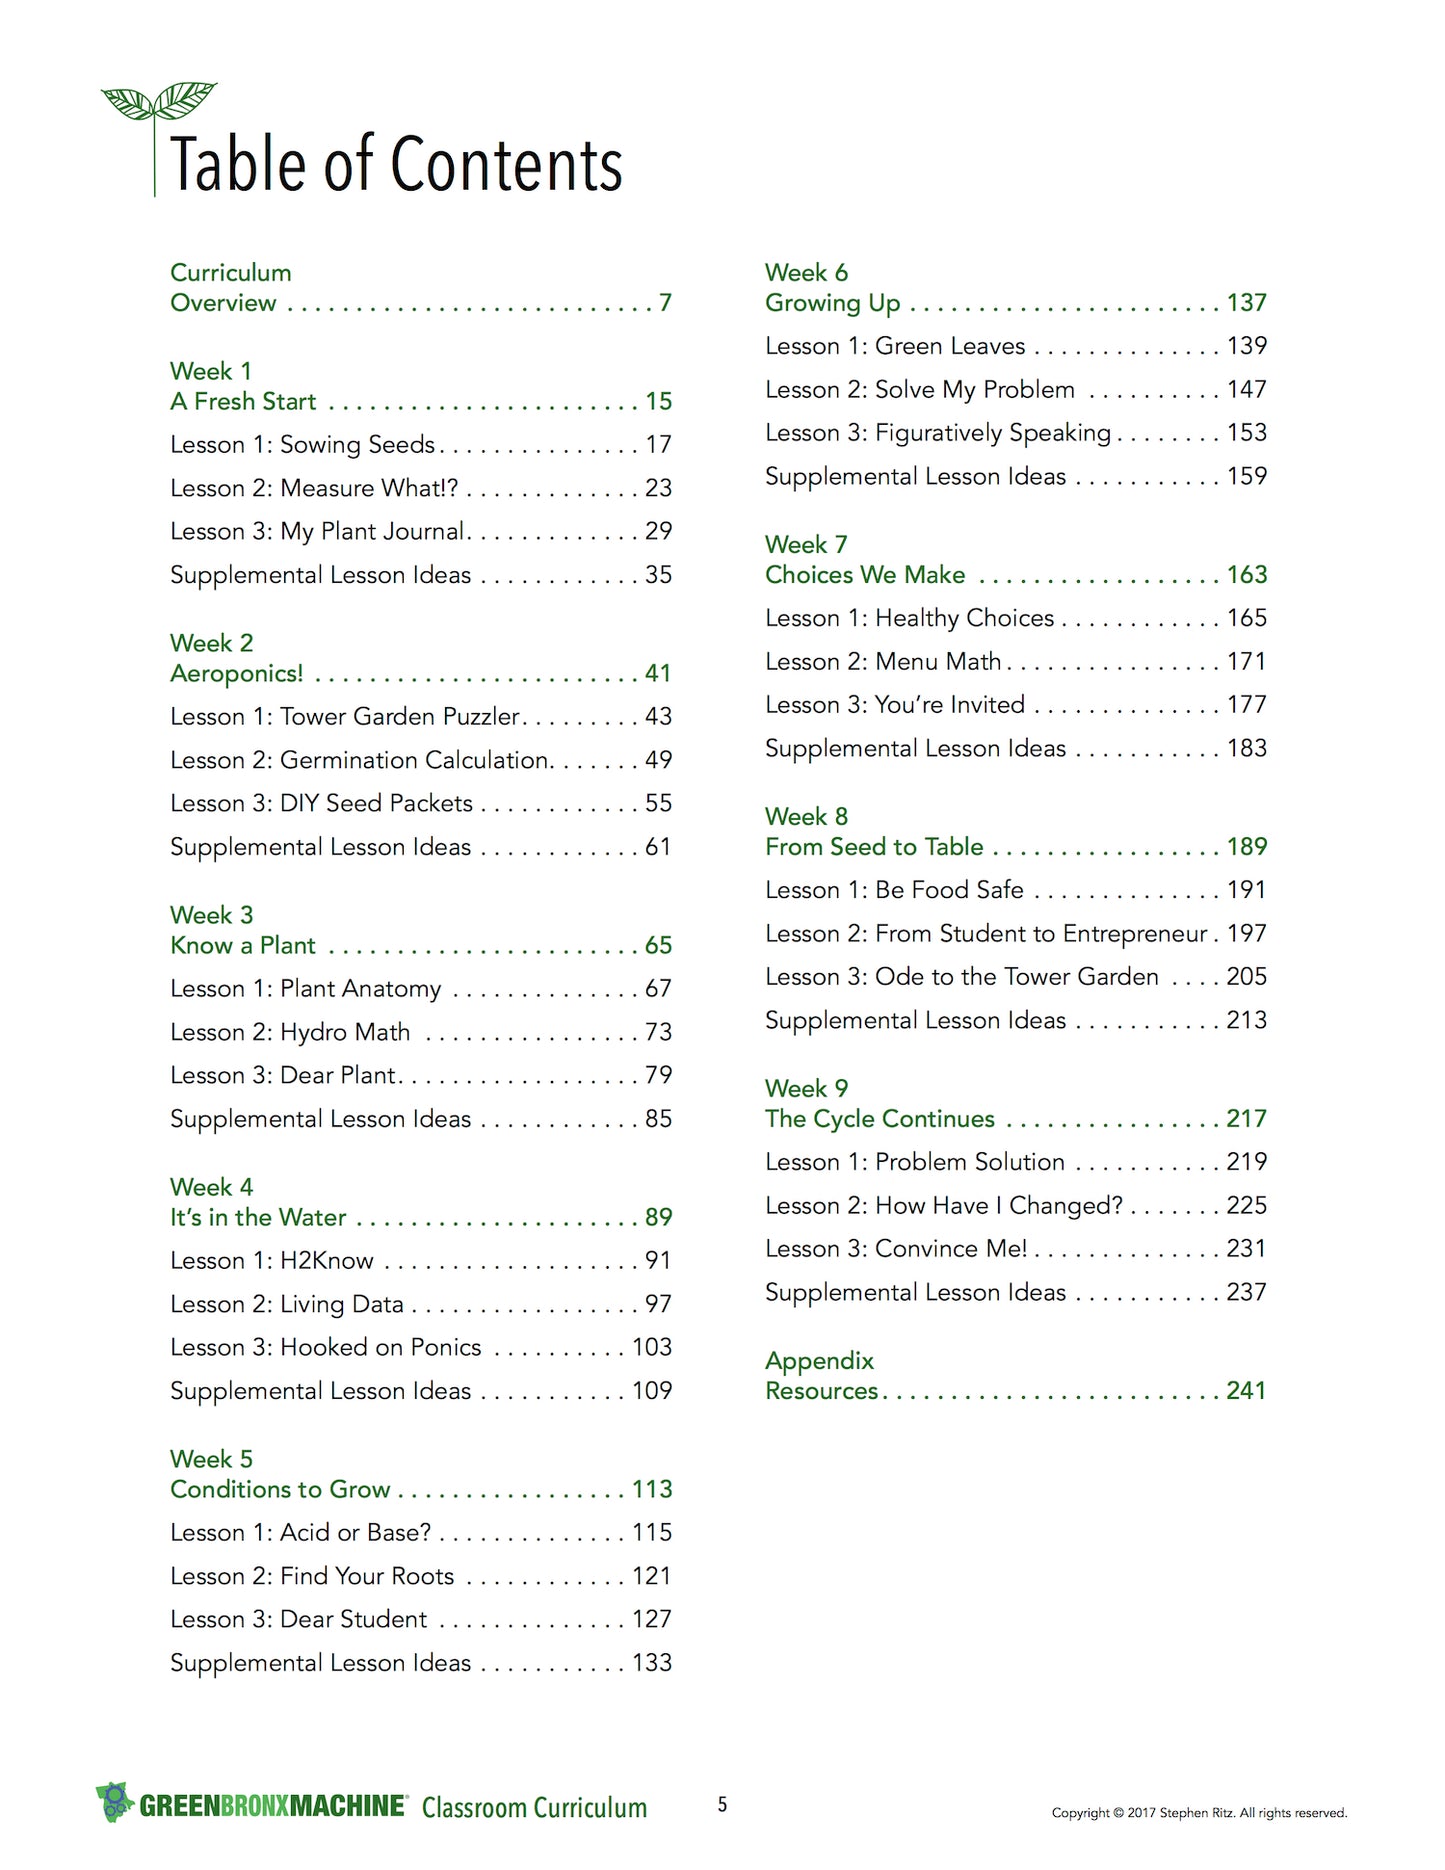 Curriculum Page 5 &#8211; Table of Contents